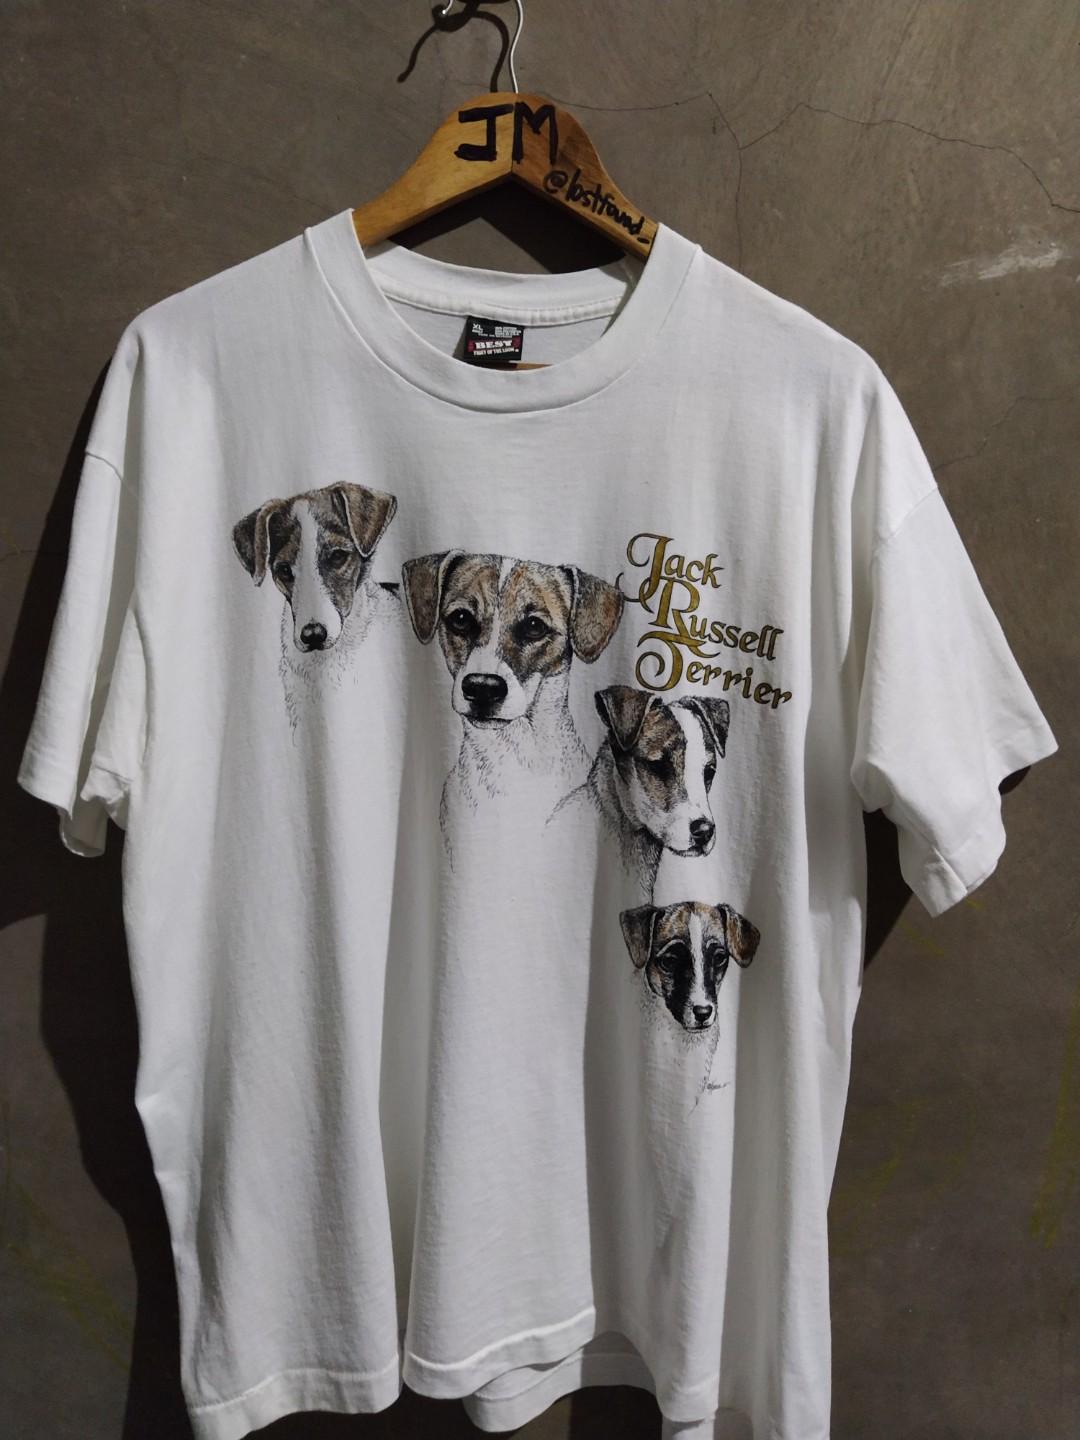 JACK RUSSELL TERRIER, Men's Fashion 